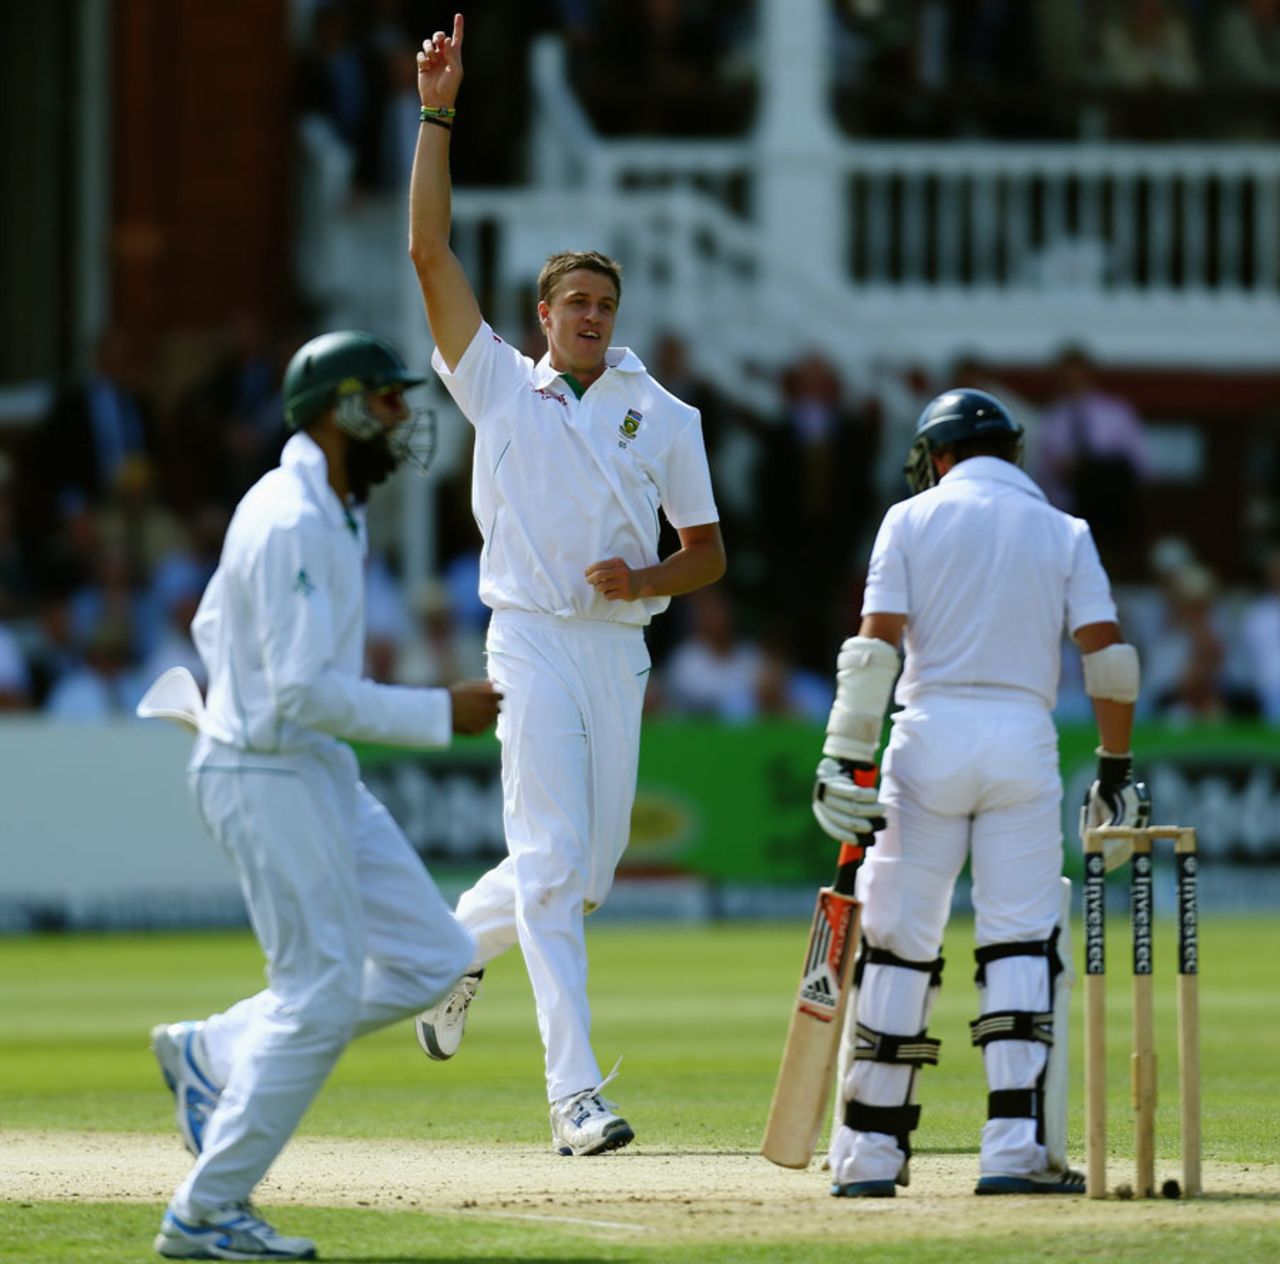 Morne Morkel removed James Taylor as England slumped, England v South Africa, 3rd Investec Test, Lord's, 2nd day, August 17, 2012